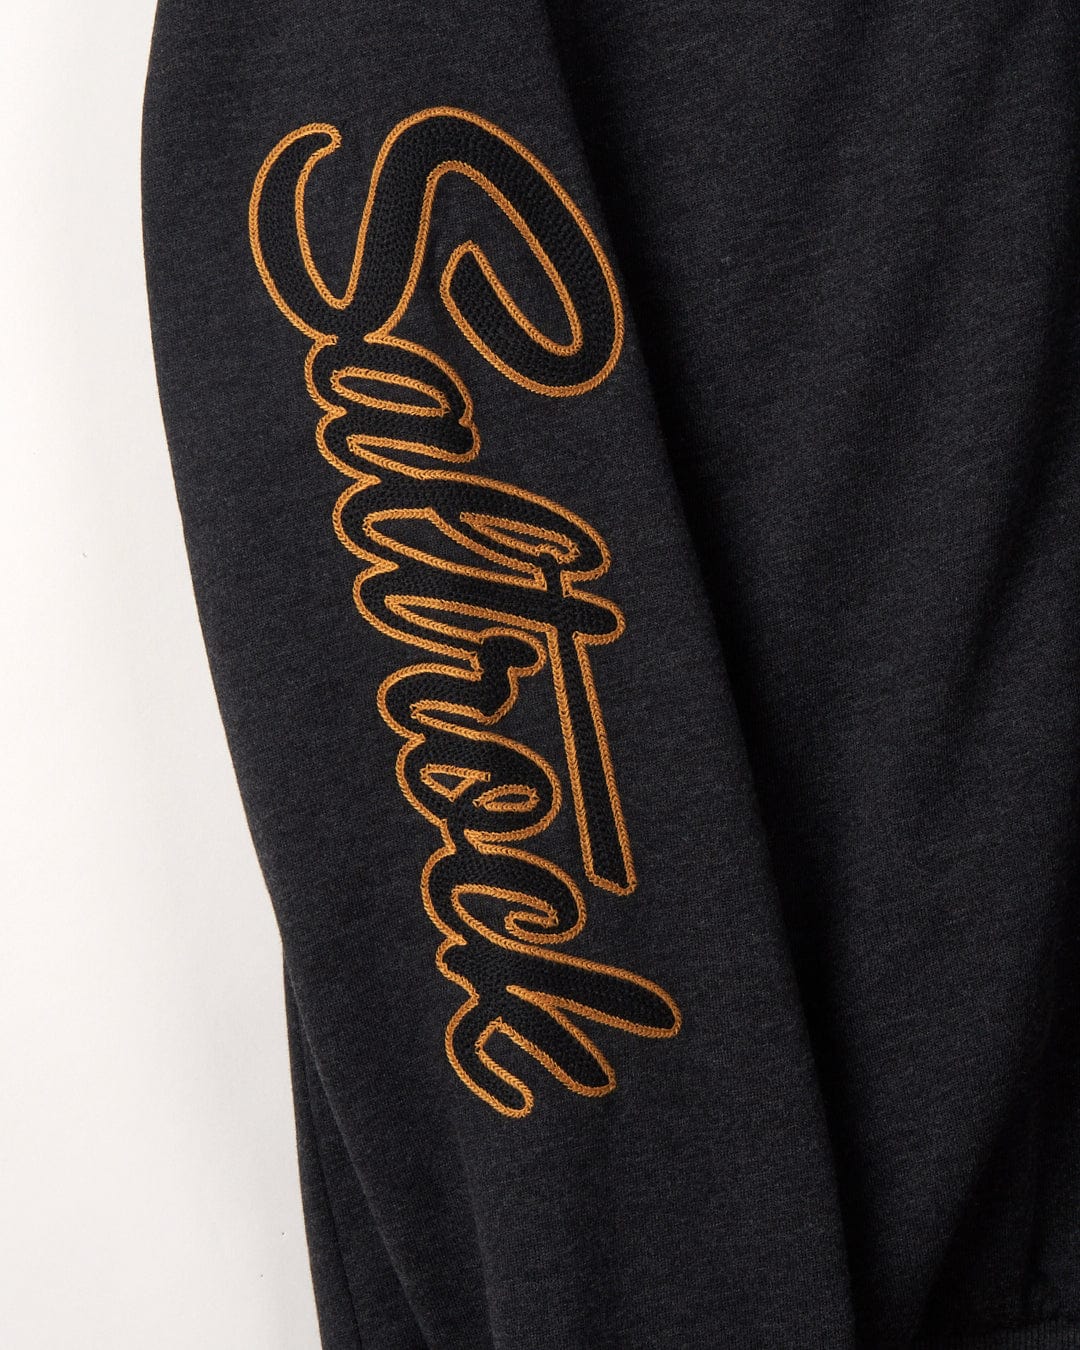 Close-up of a grey Vegas Script Borg Lined Zip Hoodie with a gold "Saltrock" logo embroidered chain stitch in a cursive style down the sleeve.